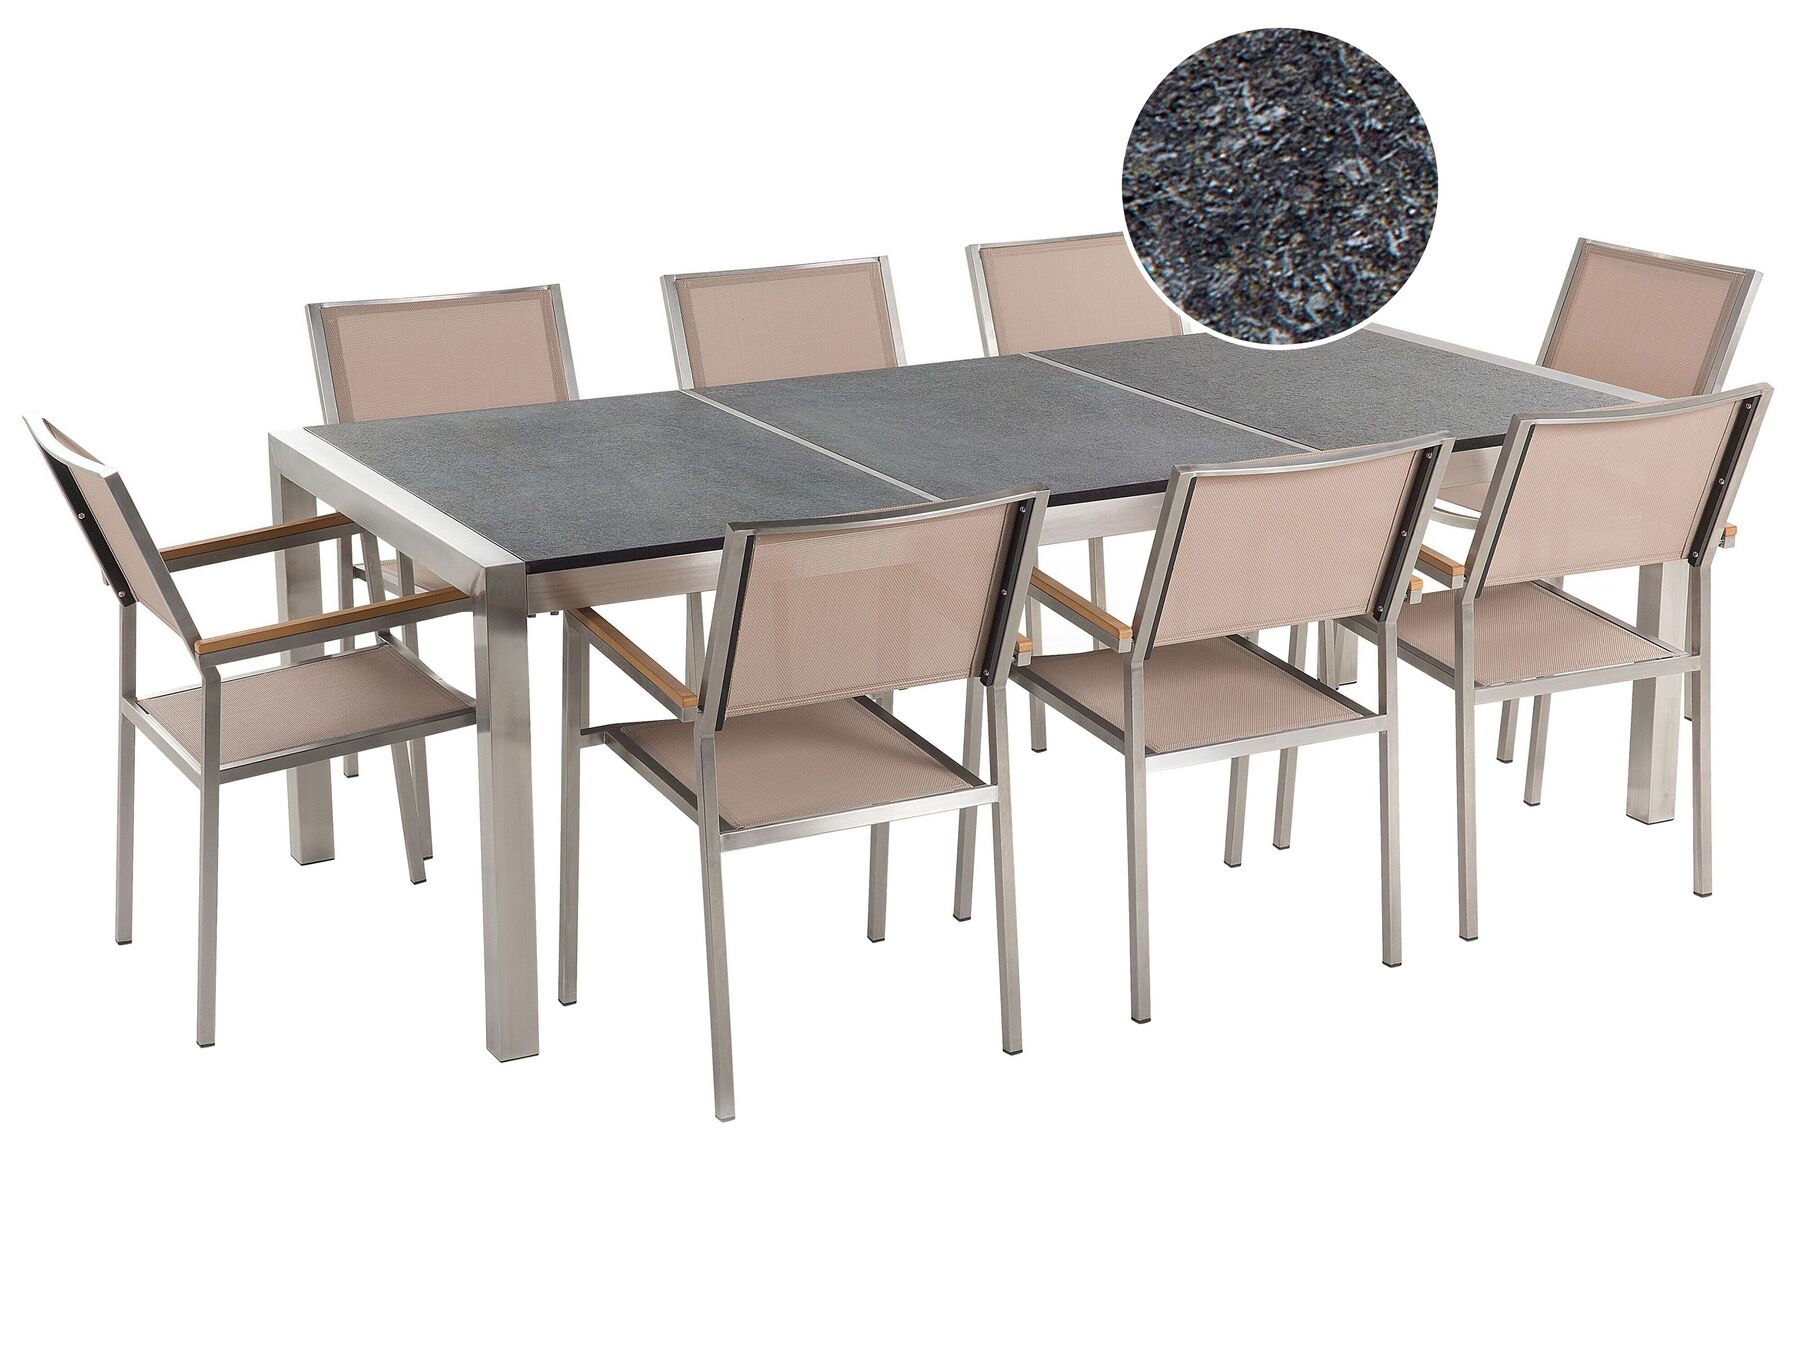 8 Seater Garden Dining Set Black Granite Triple Plate Top with Beige Chairs GROSSETO_380169